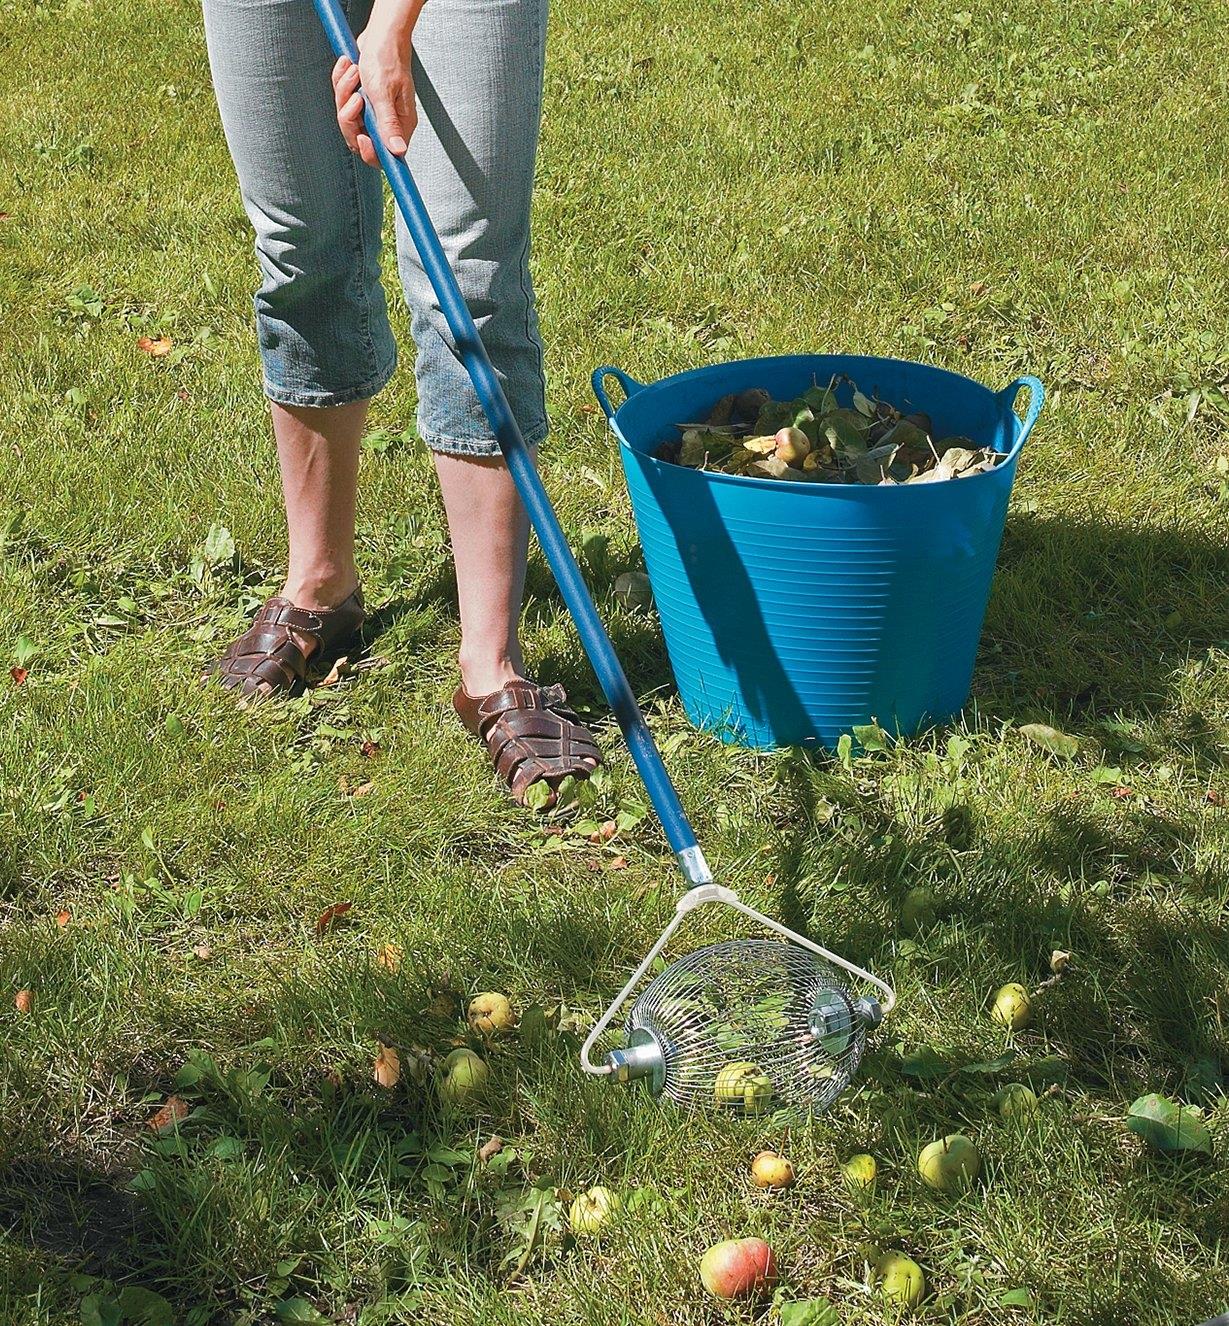 Collecting fallen apples from a lawn using the Nut & Fruit Gatherer